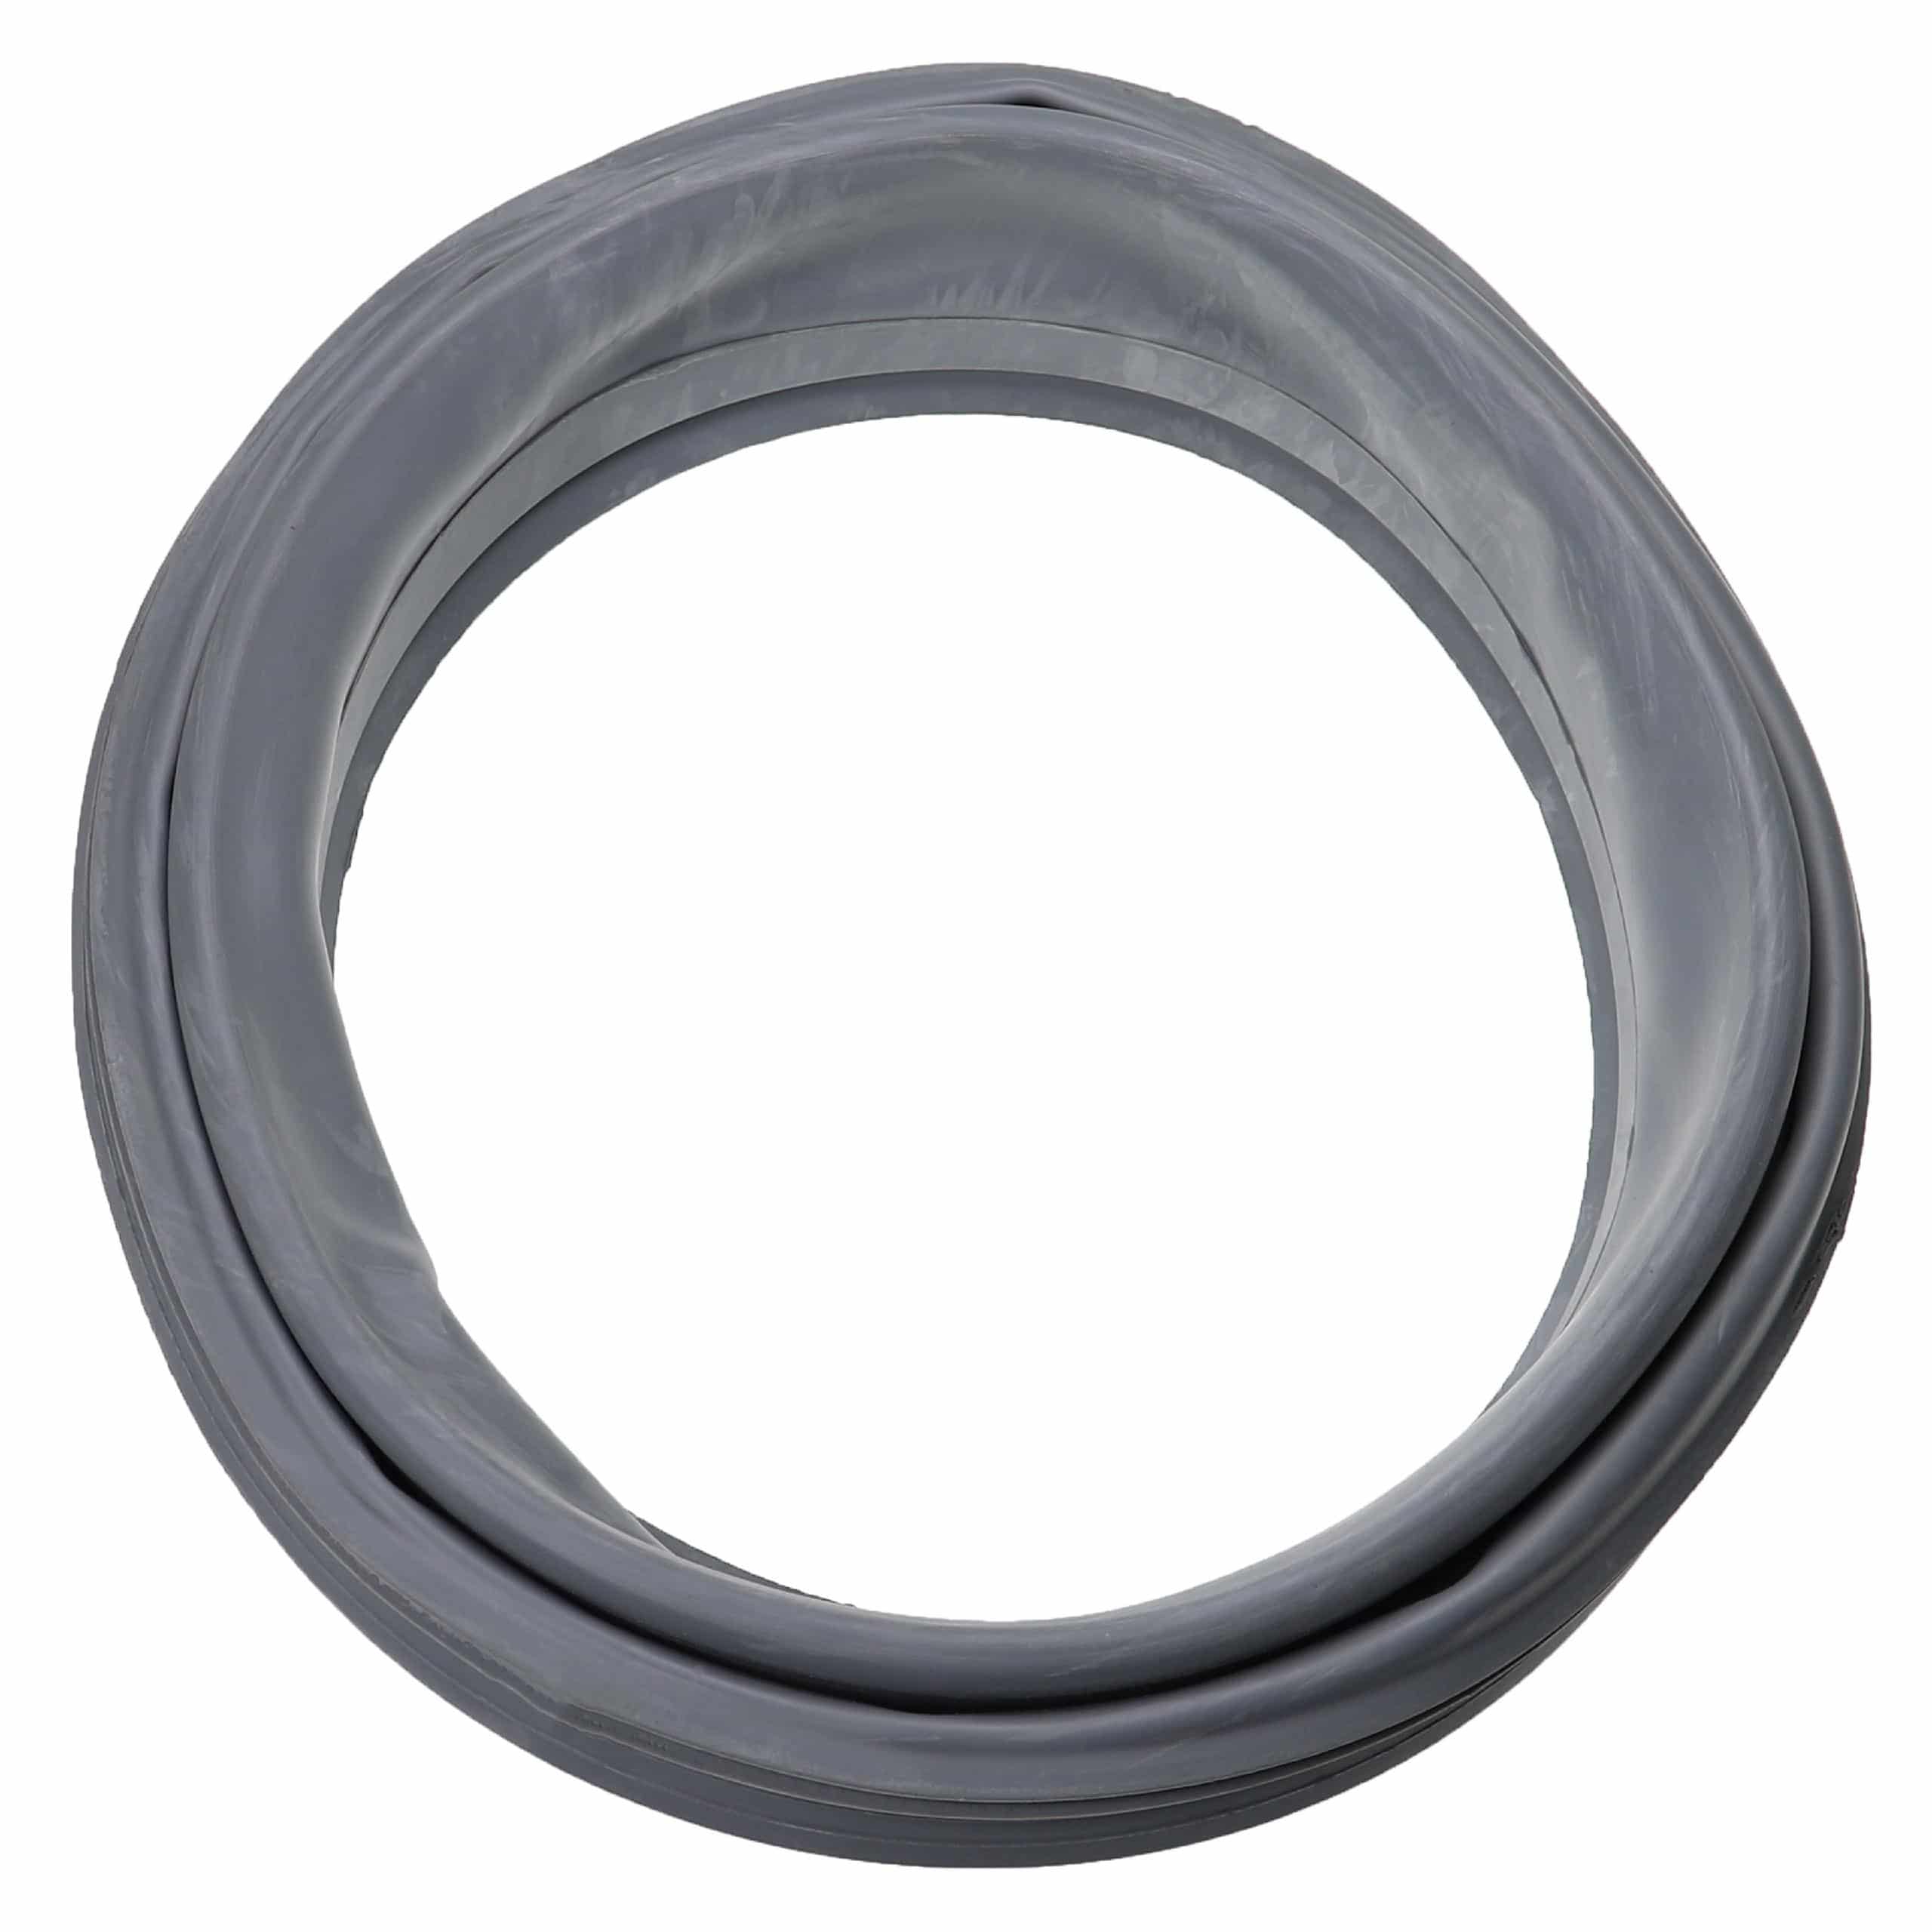 Door Seal replaces 1548462 for Miele Washing Machine